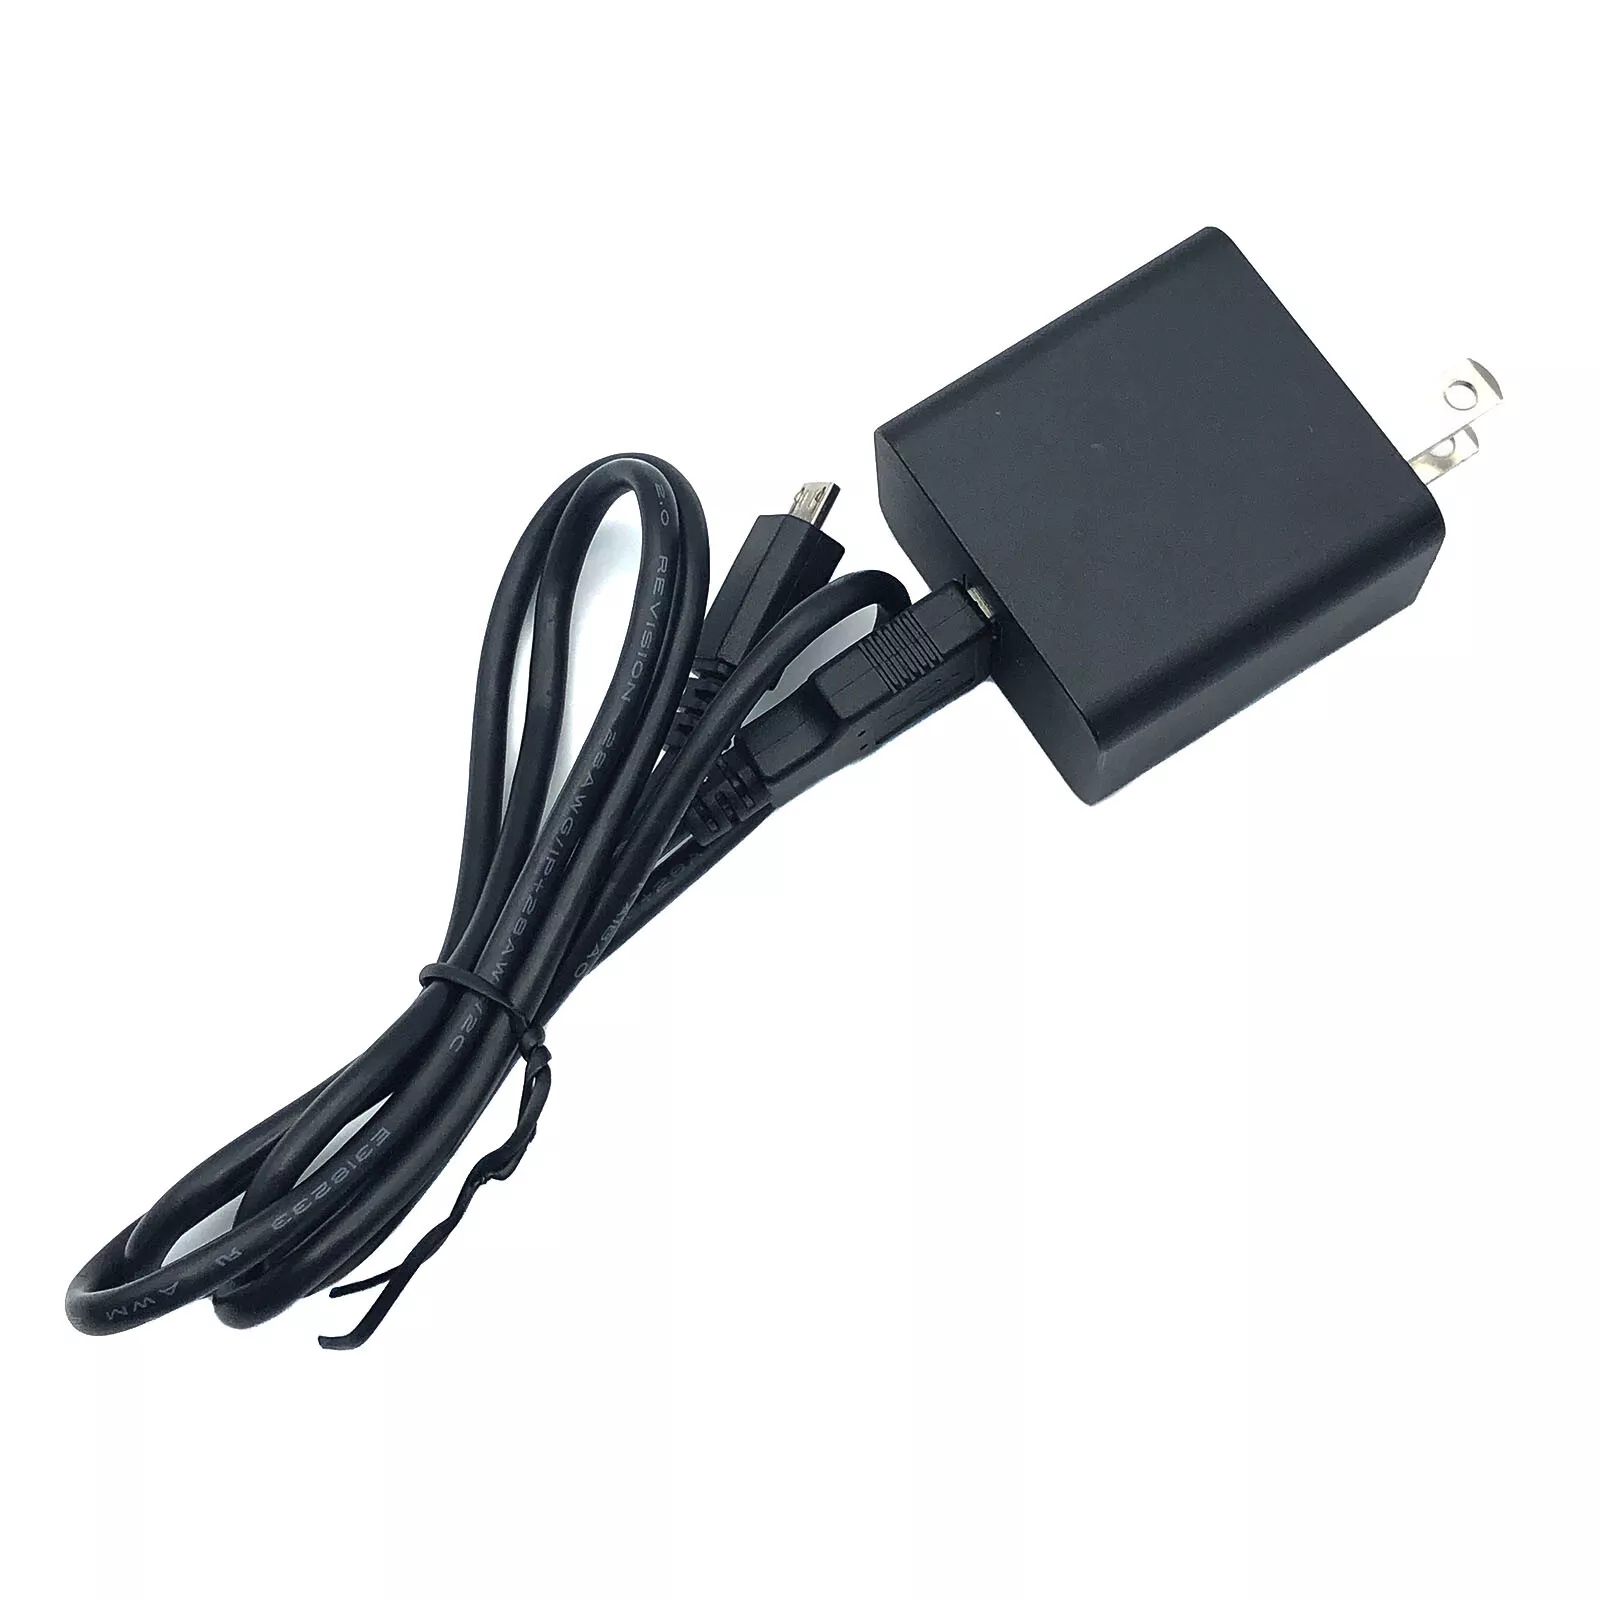 *Brand NEW*Genuine LiteOn PA-1100-25 Micro USB 5.35v 2.0A AC Adapter For ASUS Transformer Book T90 T